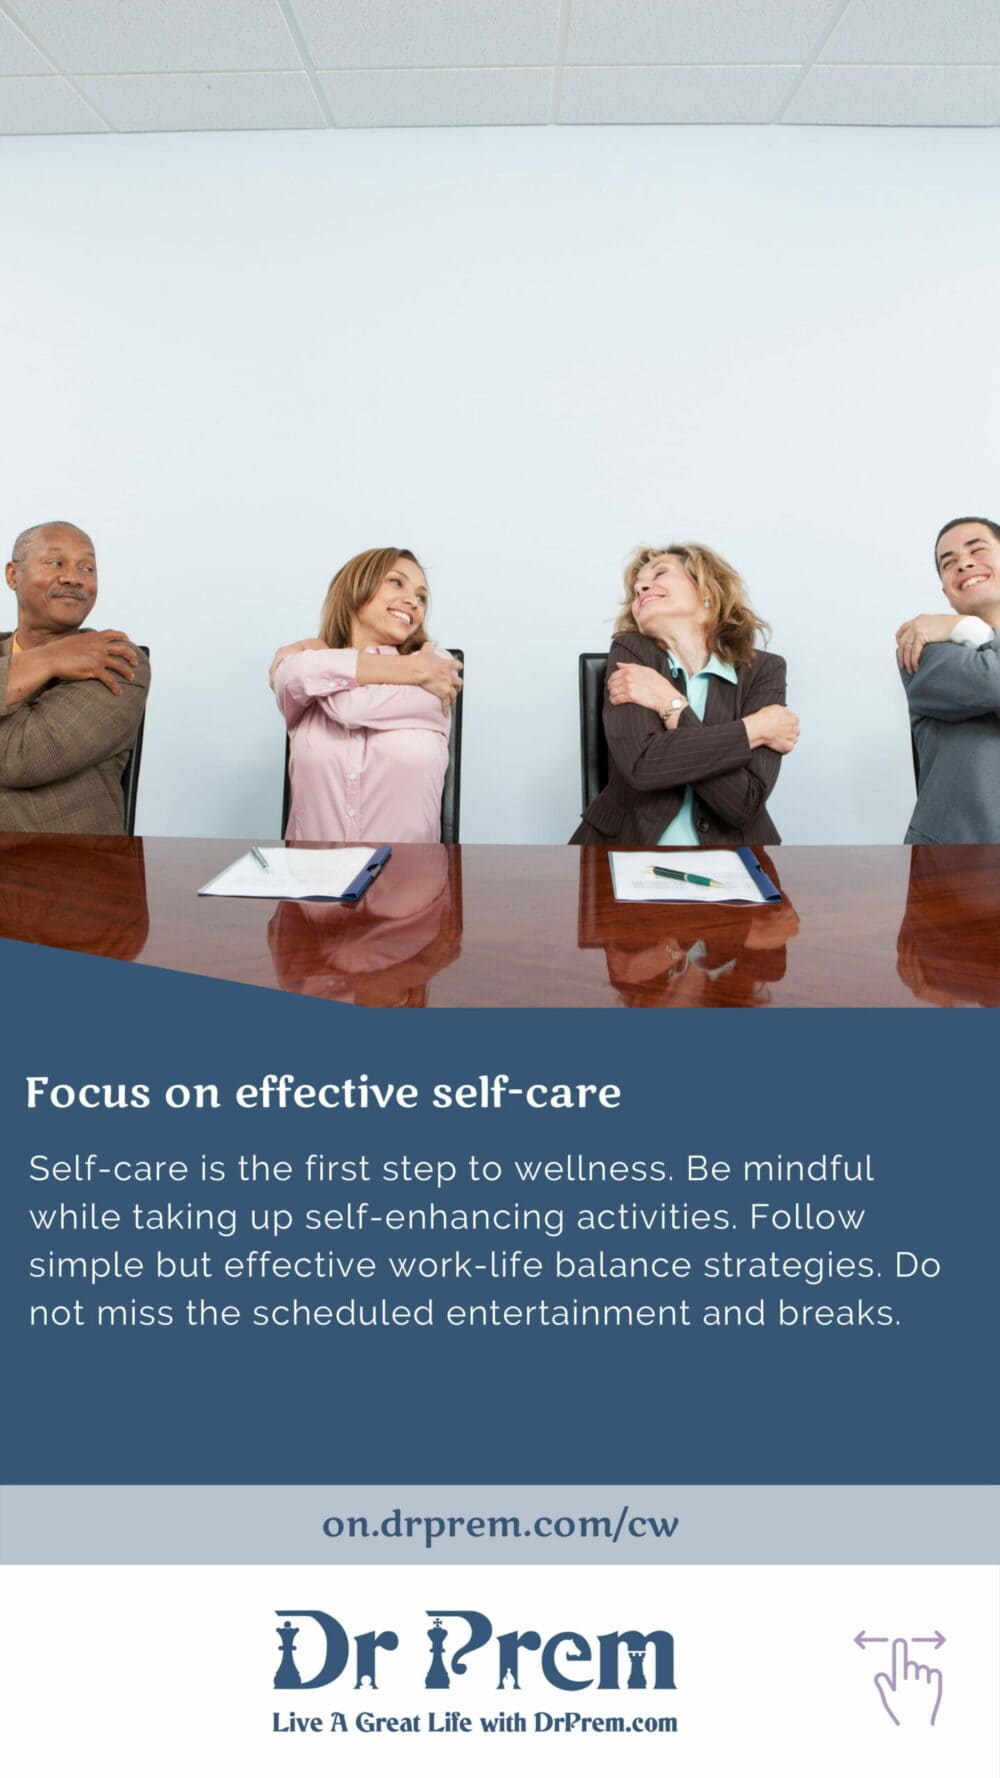 Best Corporate Culture And Wellness Practices To Drive Engagement, Productivity And Well-Being-04